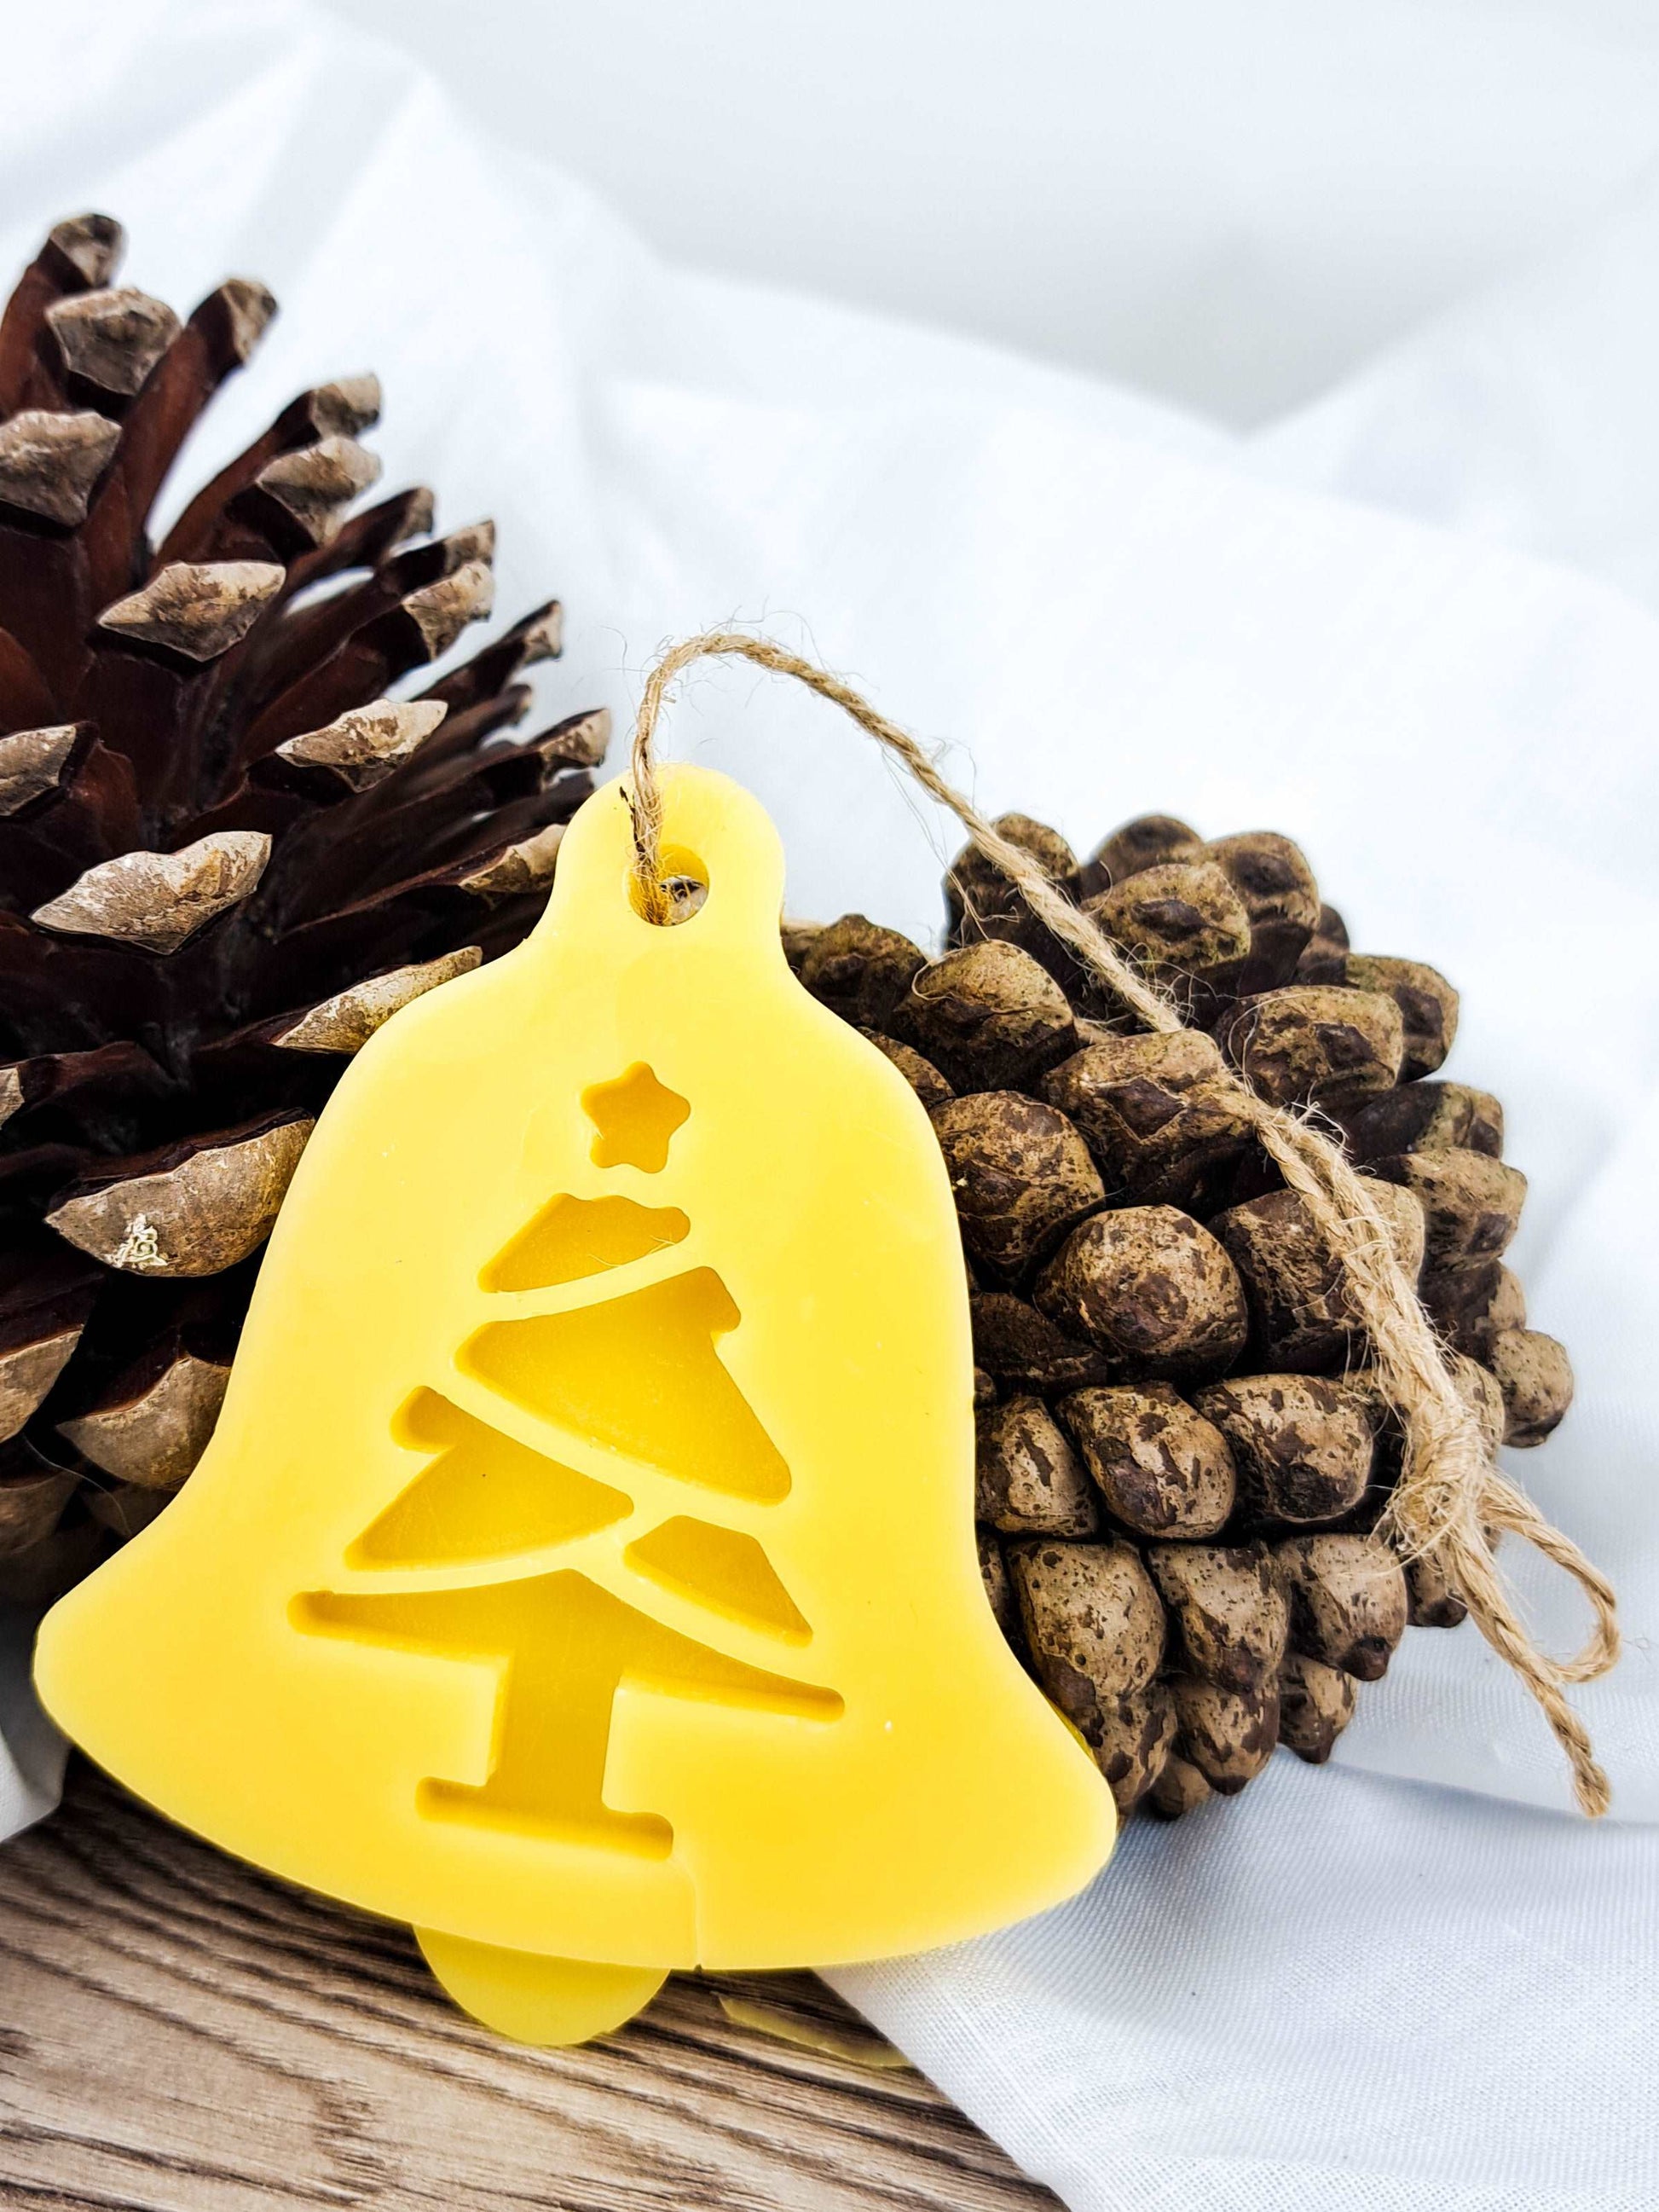 Beeswax Christmas tree decorations, Hand made in UK, ornaments, unscented ornaments, bee zero waste